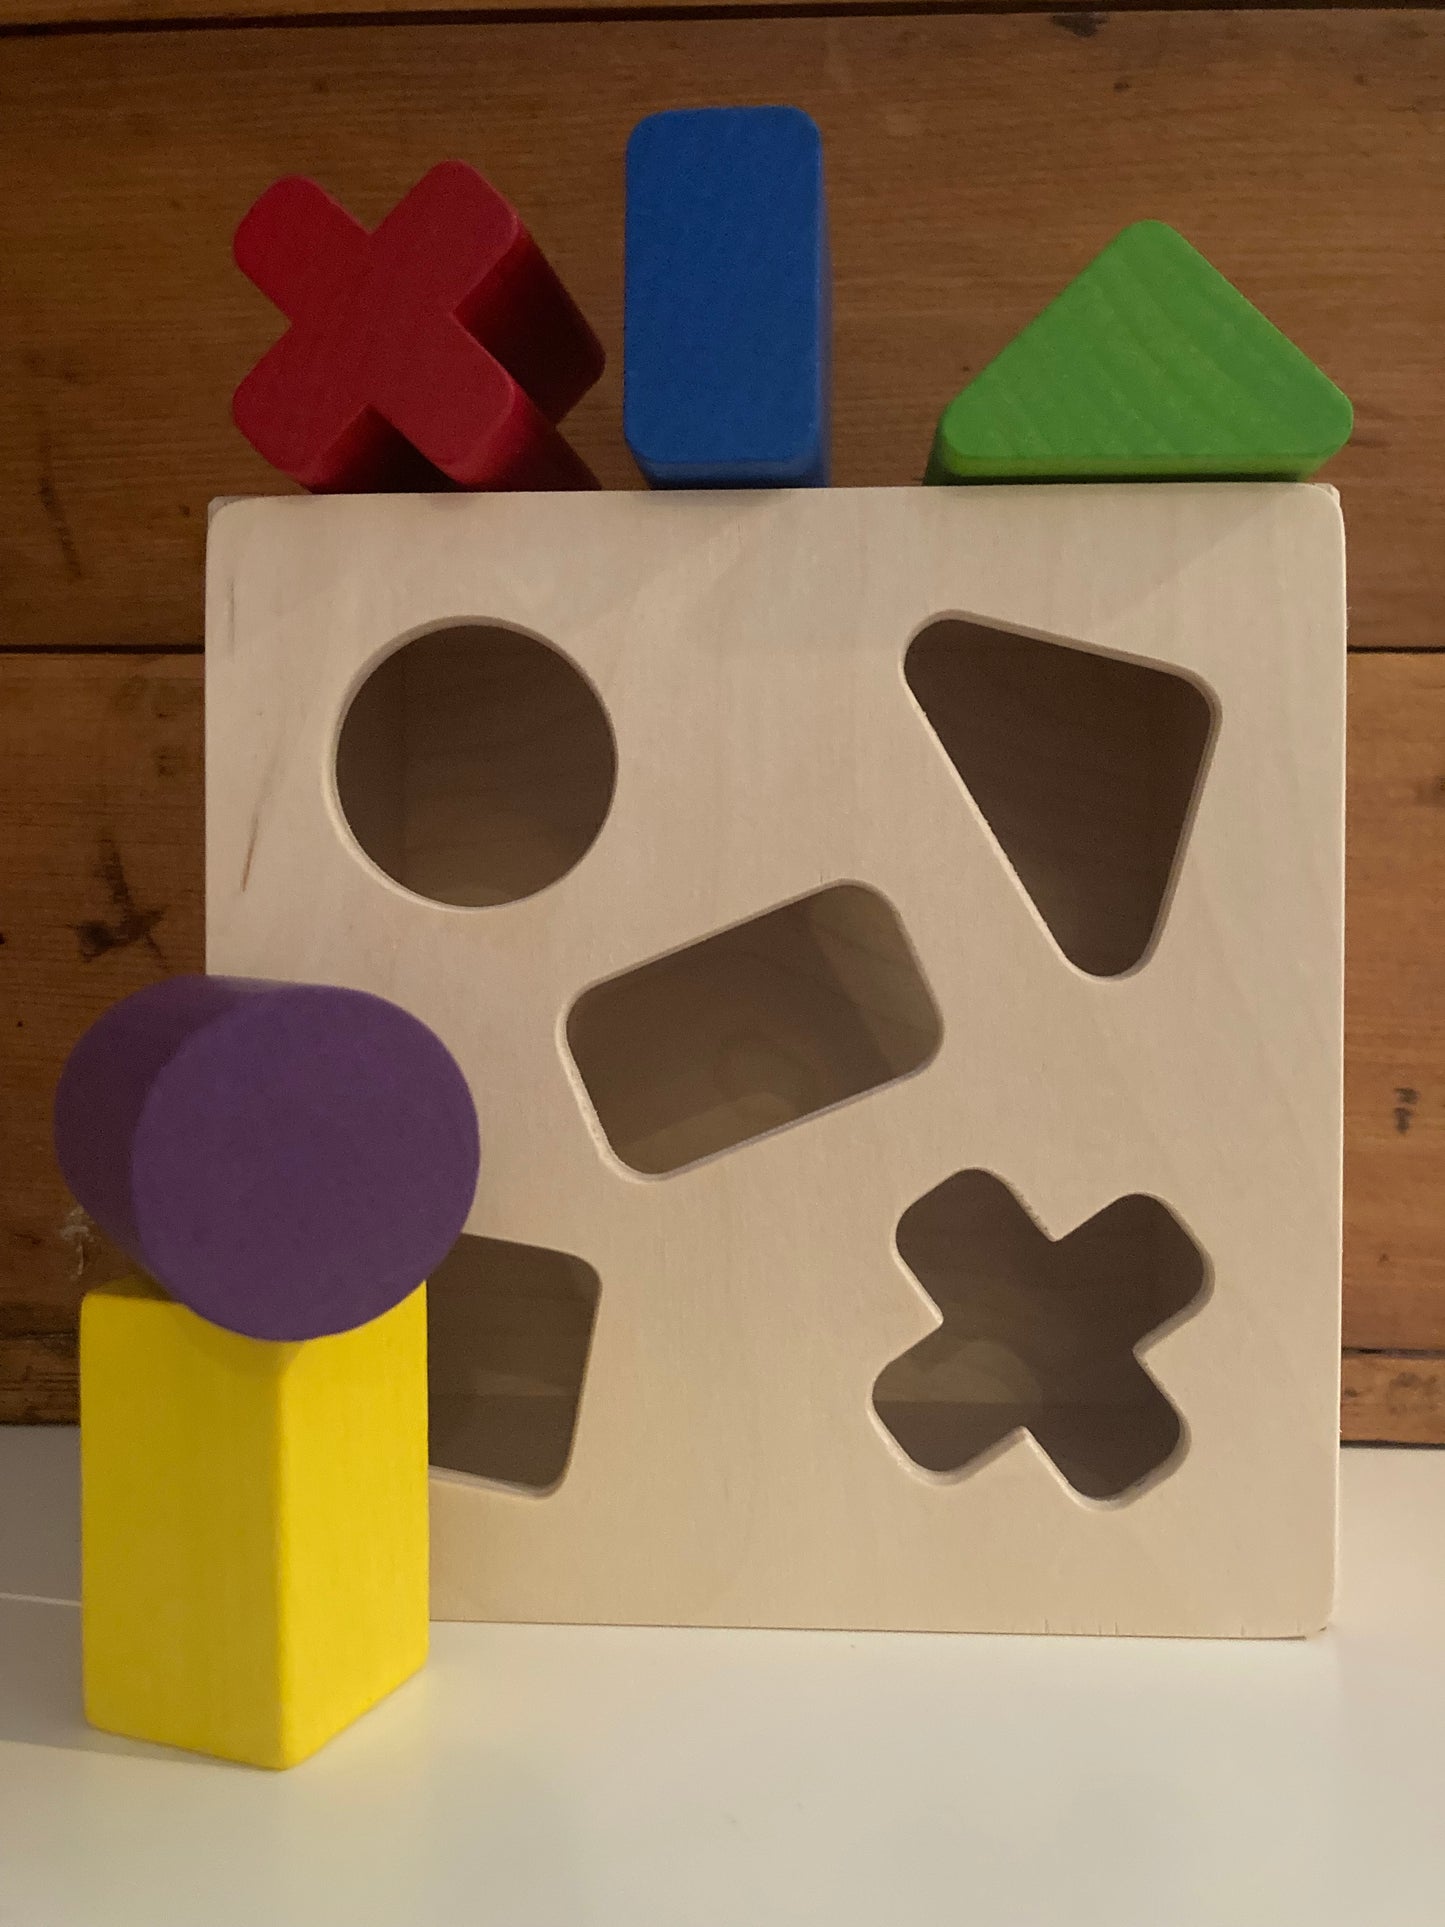 Educational Wooden Toy - SHAPE SORTING BOX